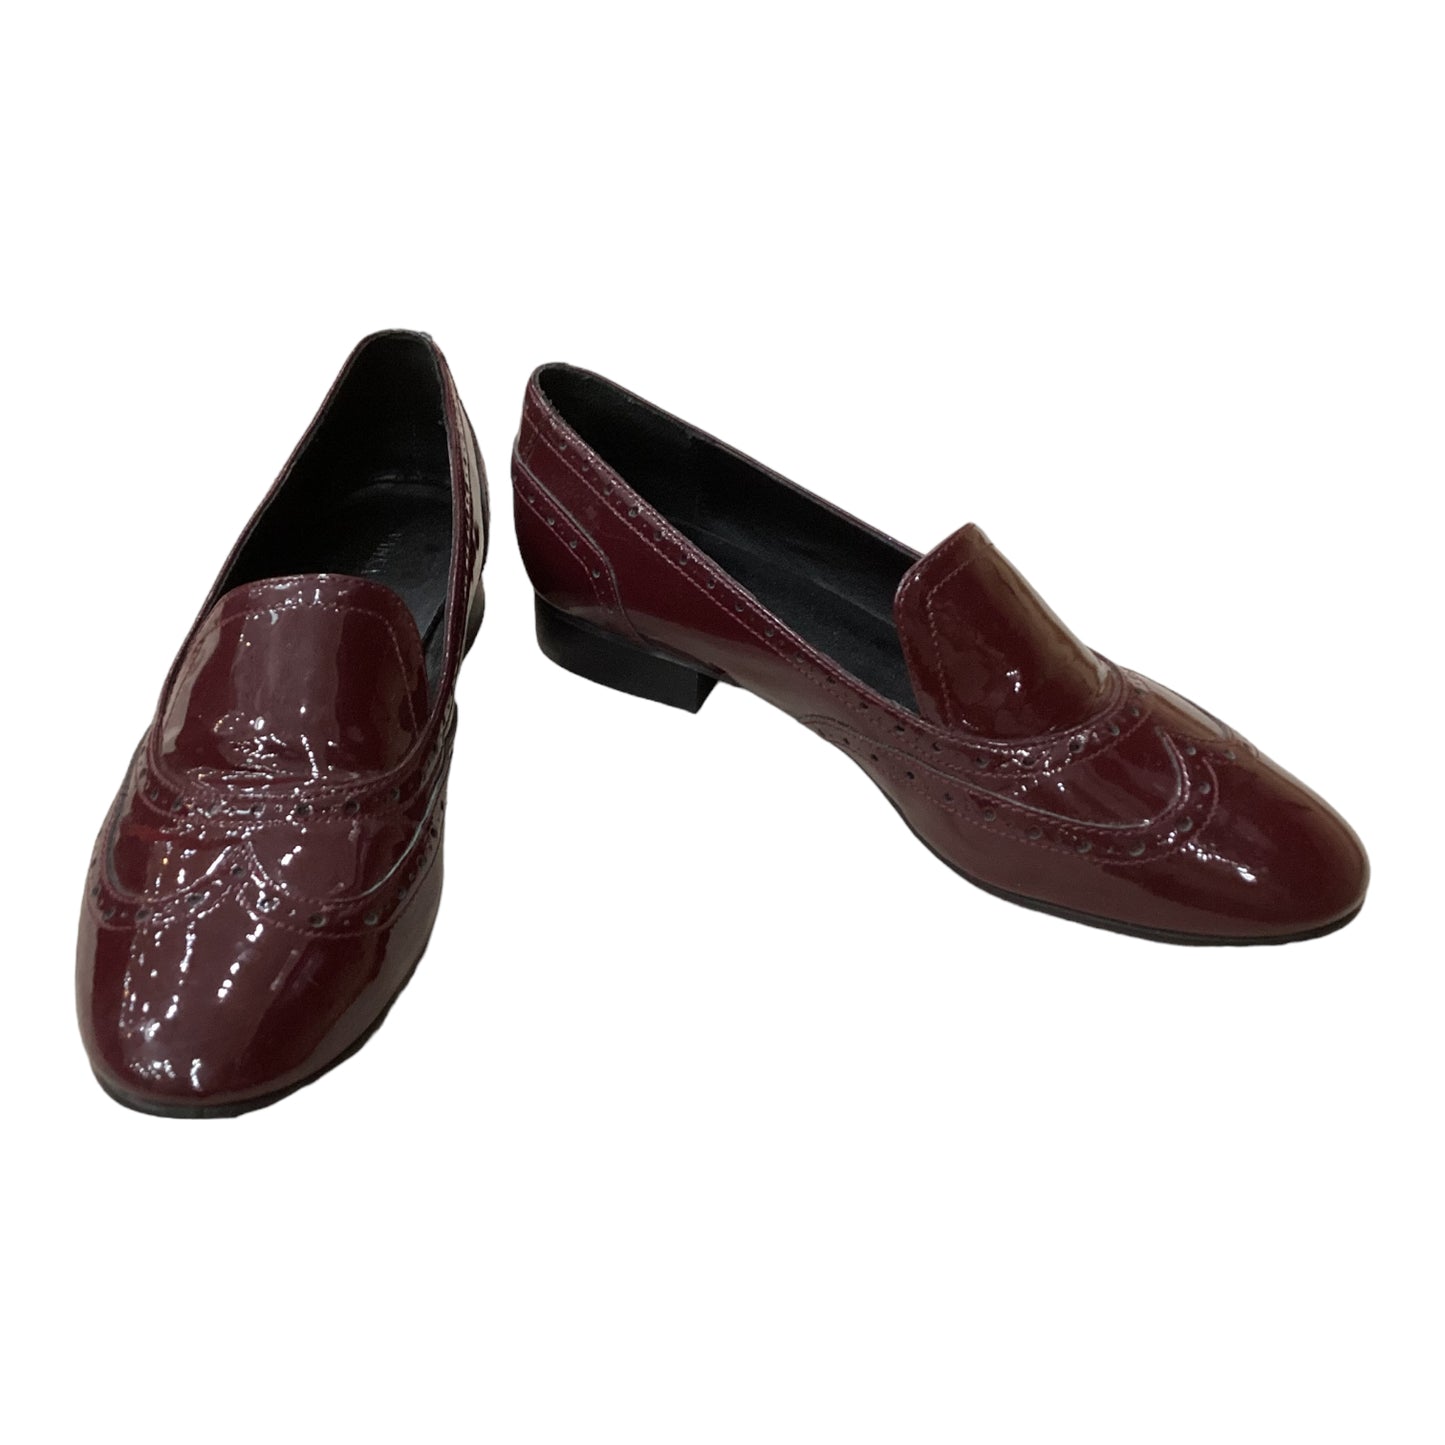 Shoes Flats Loafer Oxford By Ivanka Trump  Size: 9